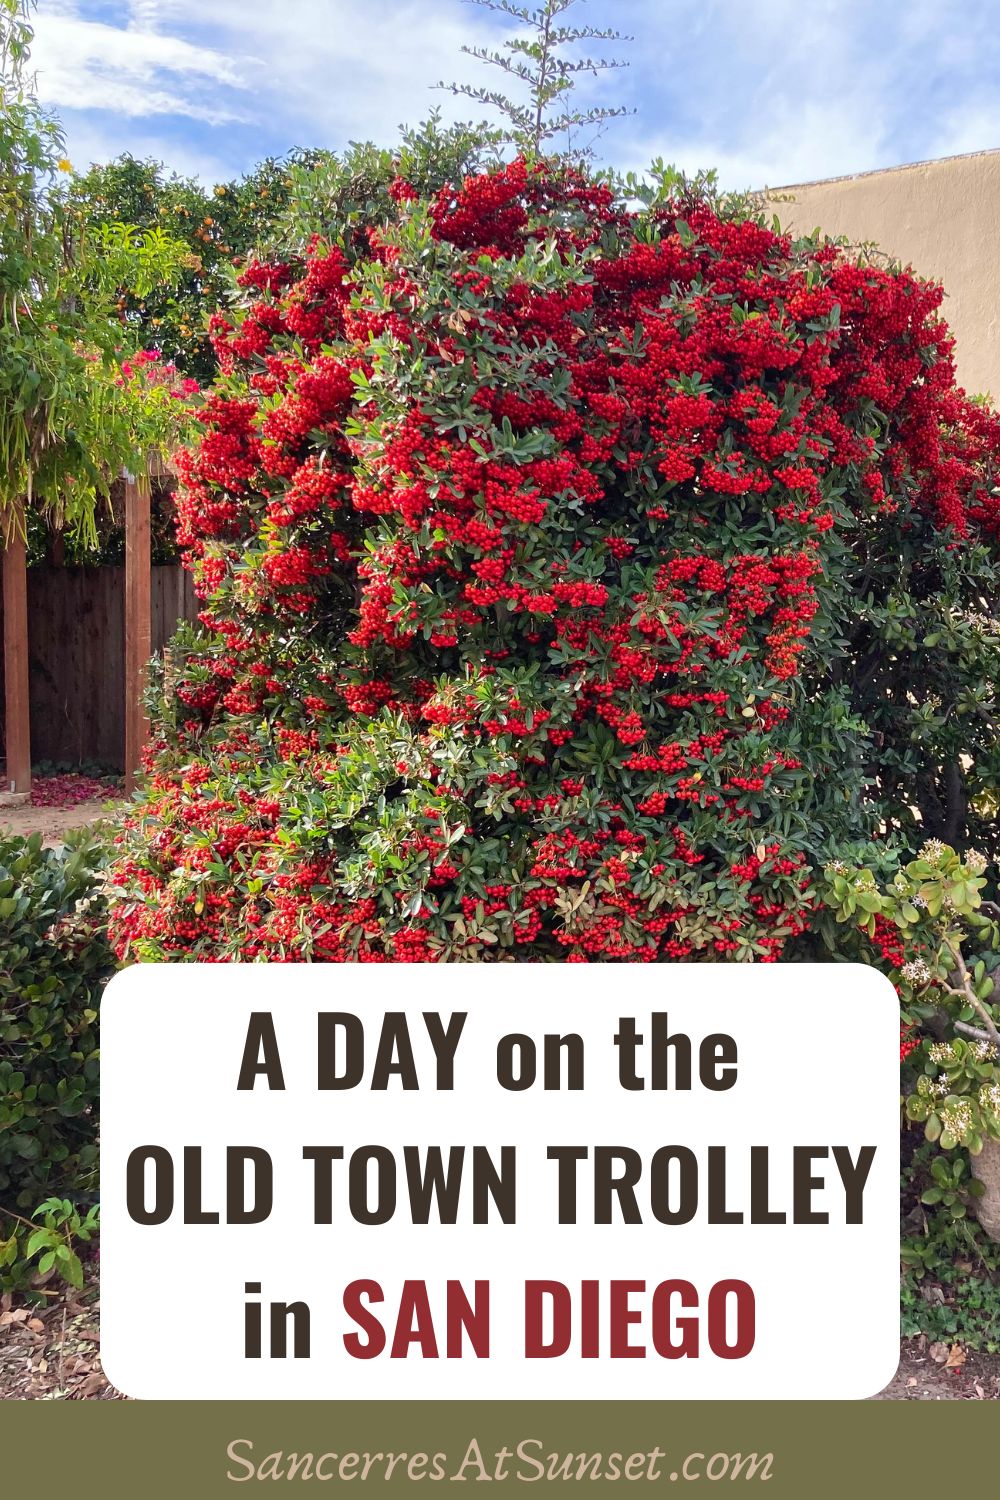 A Day on the Old Town Trolley in San Diego